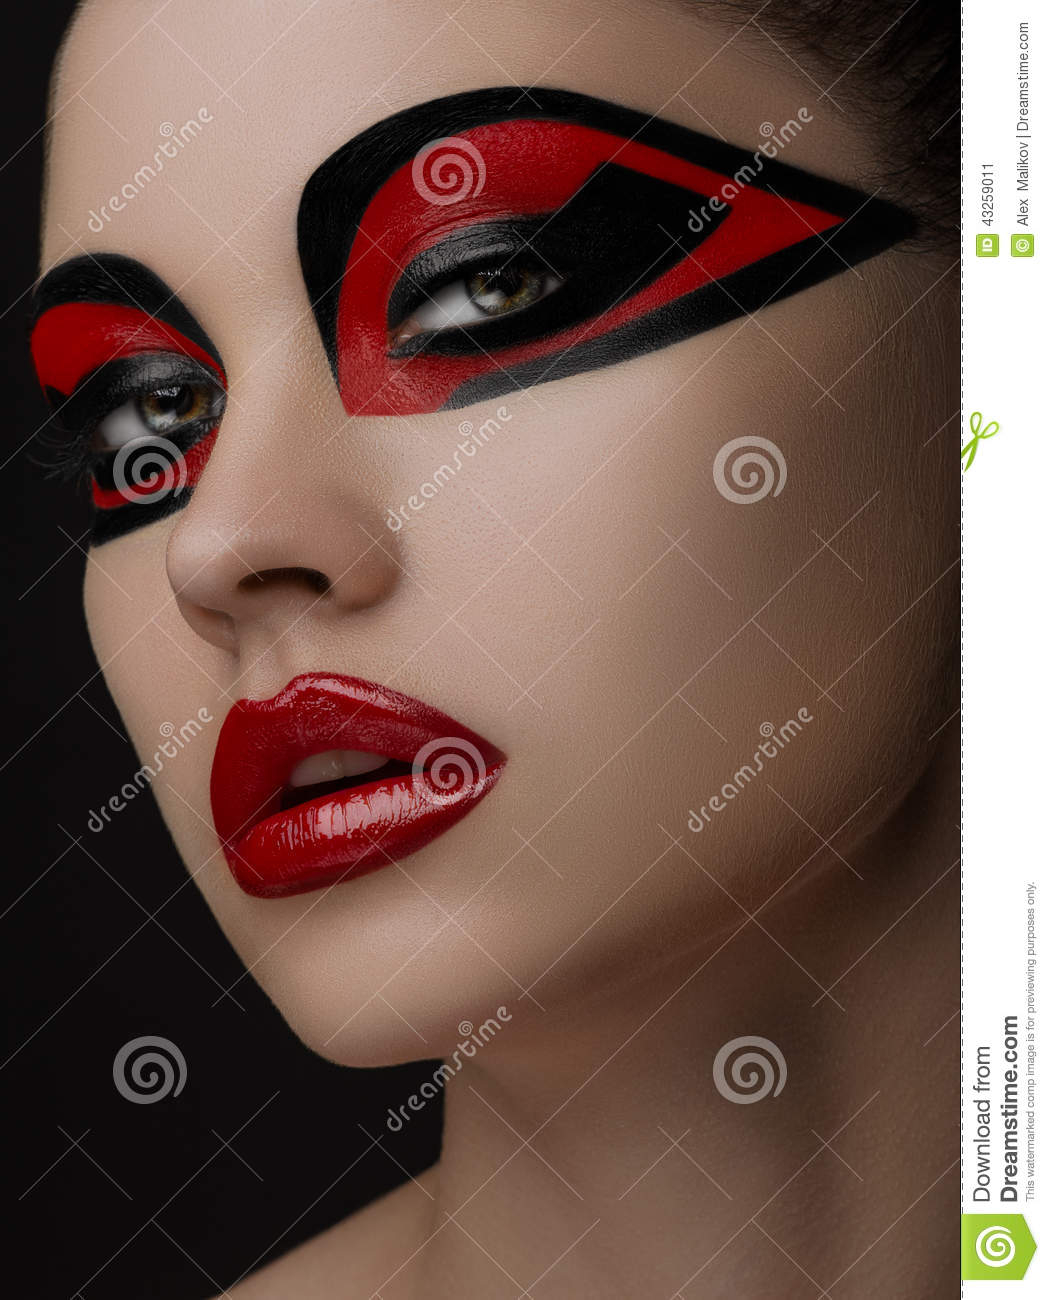 Red And Black Eye Makeup Red Lips Black Makeup On The Eyes Of The Mask Women Beauty Stock